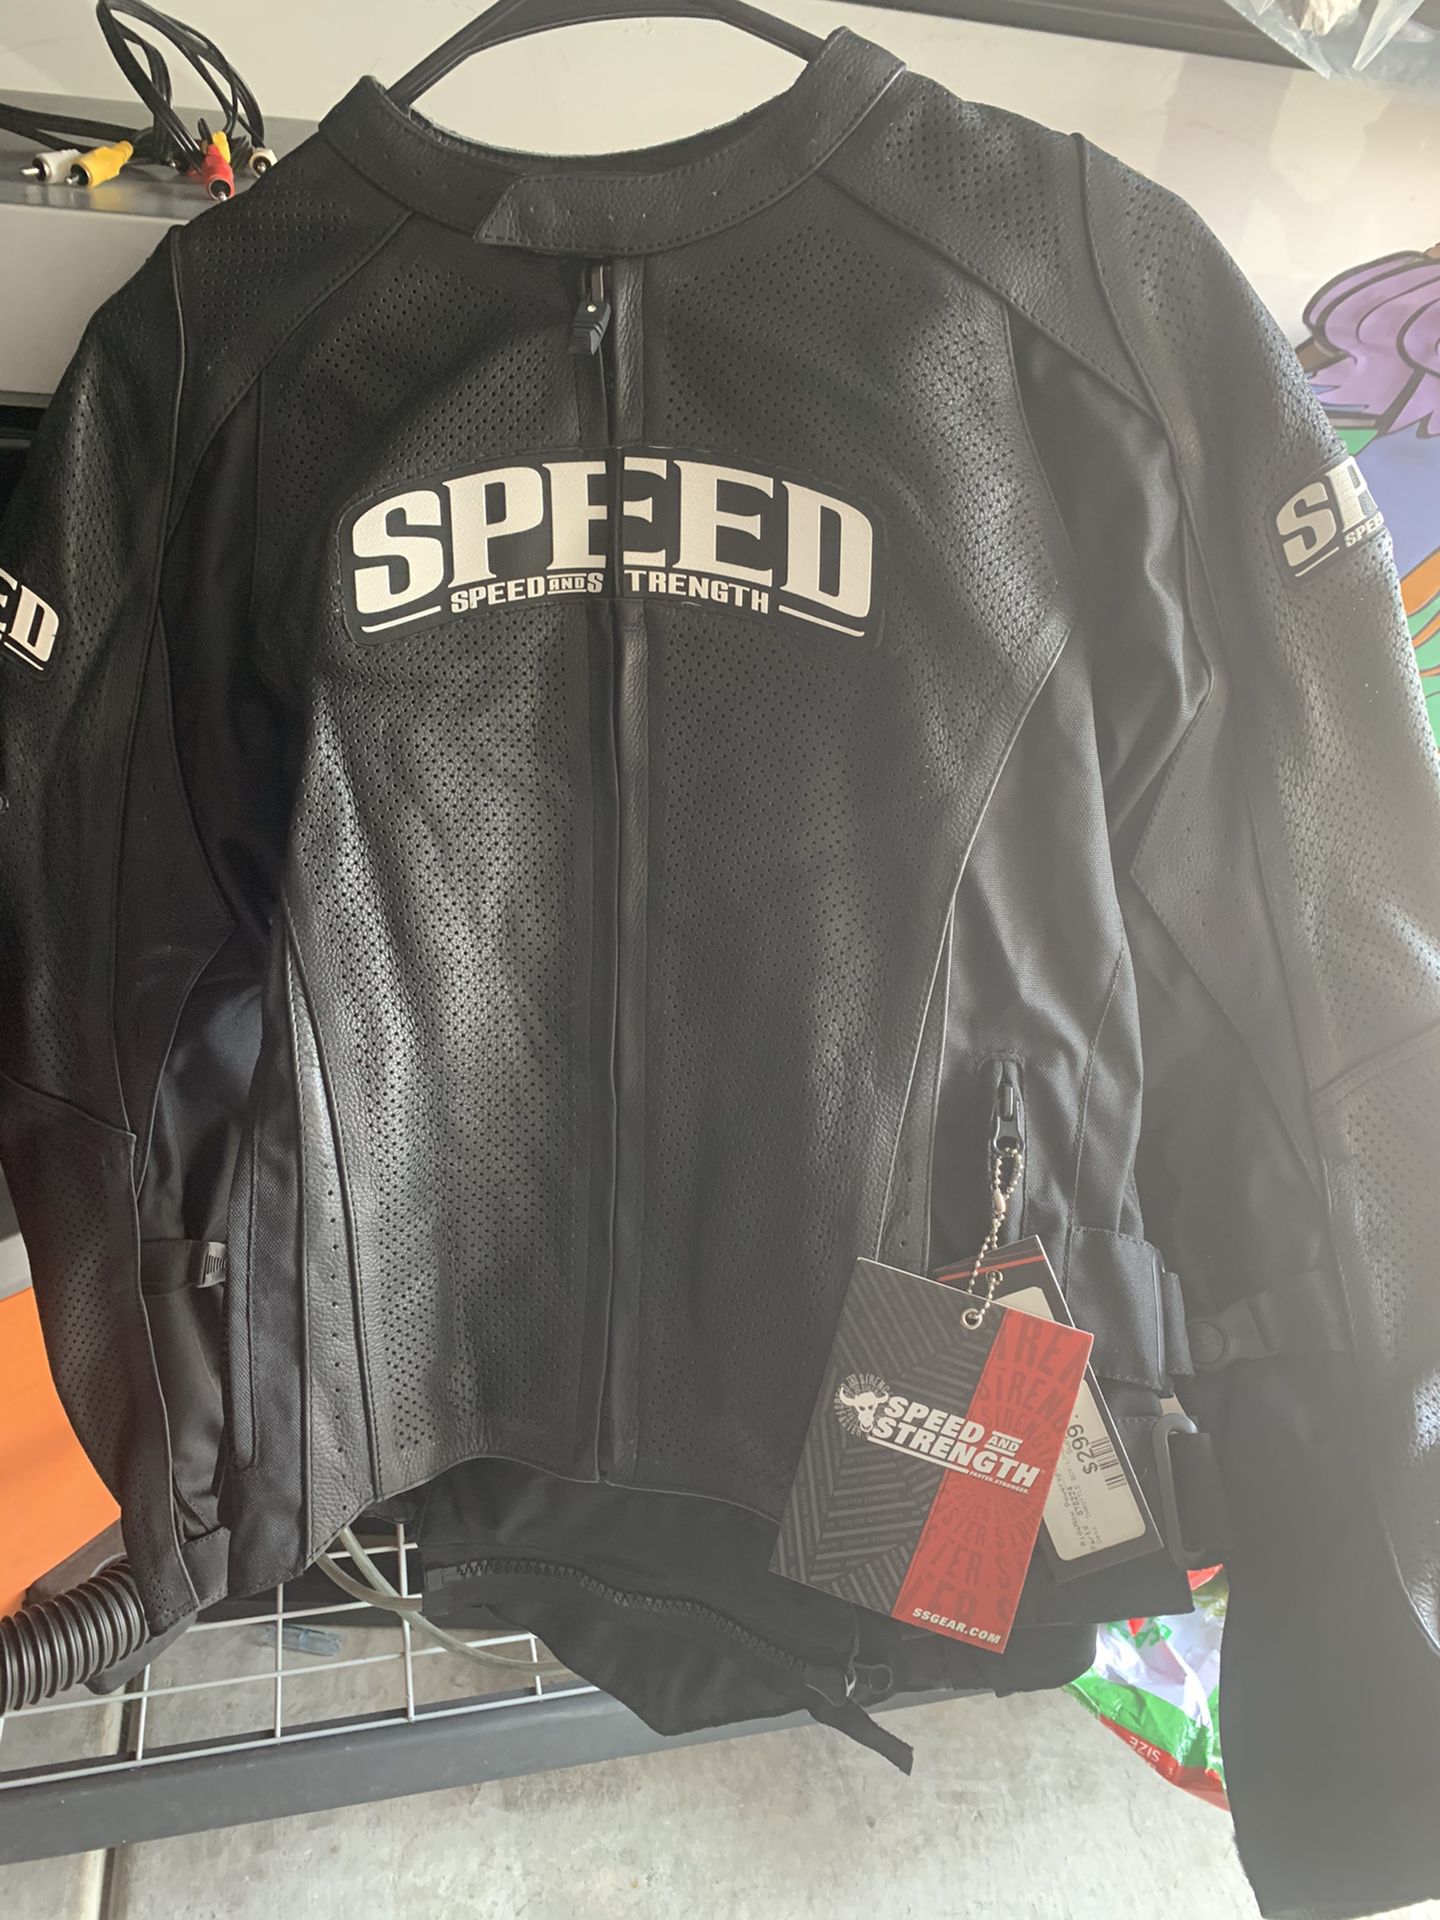 Motorcycle jacket and vest